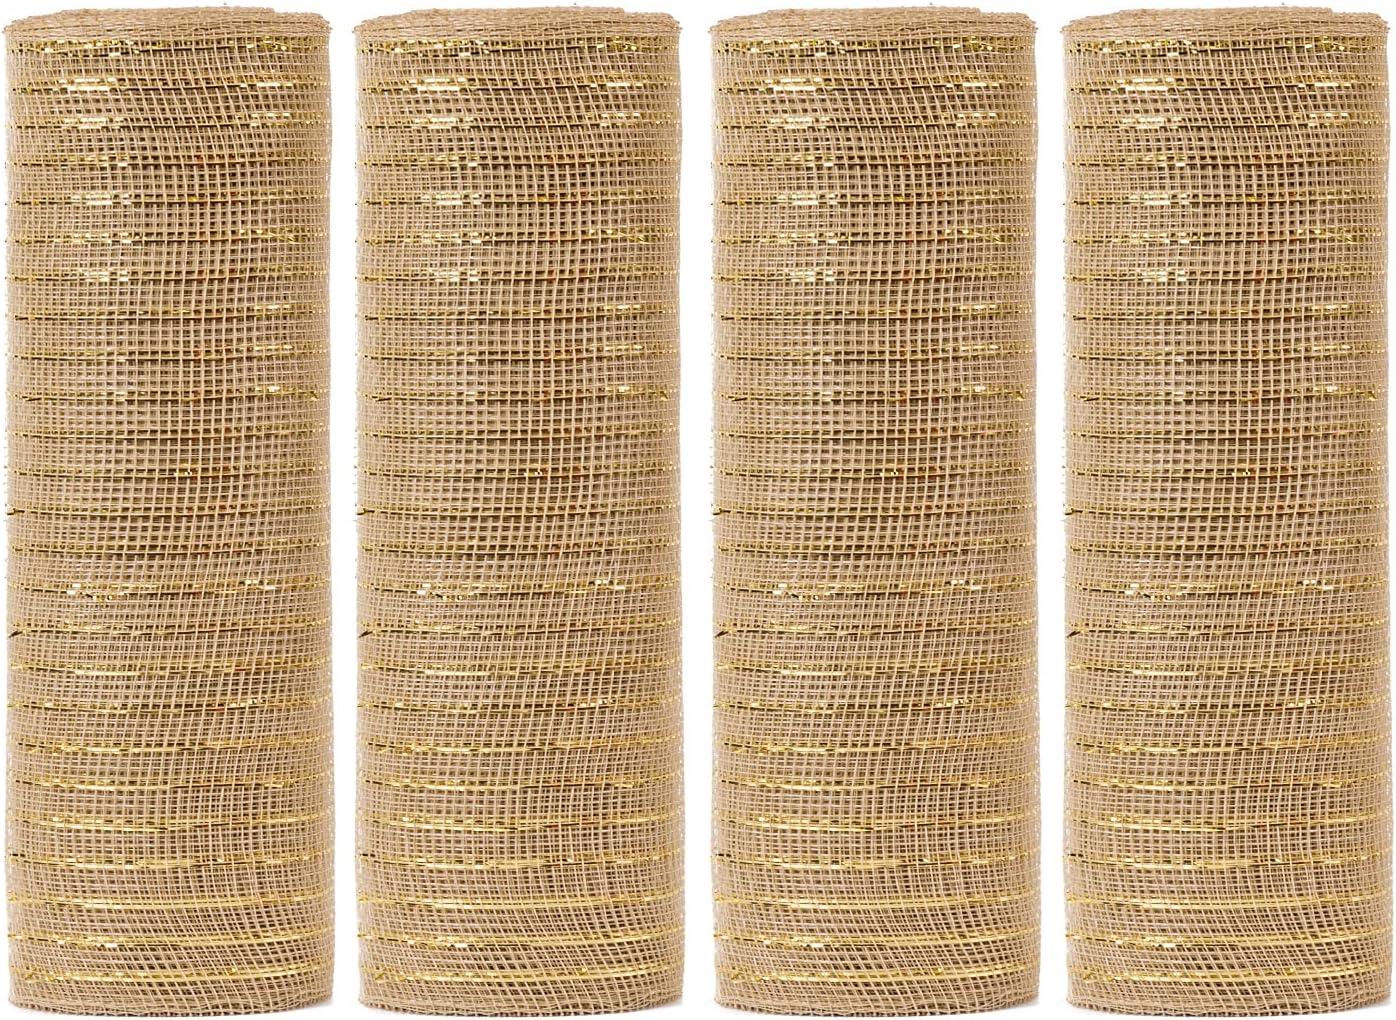 Poly Deco Mesh 10 inch x 10 Yards Each Roll, Metallic Foil Mesh Set for  Wreaths, Swags, Craft, Party and Decorating Supplies - 4 Rolls 